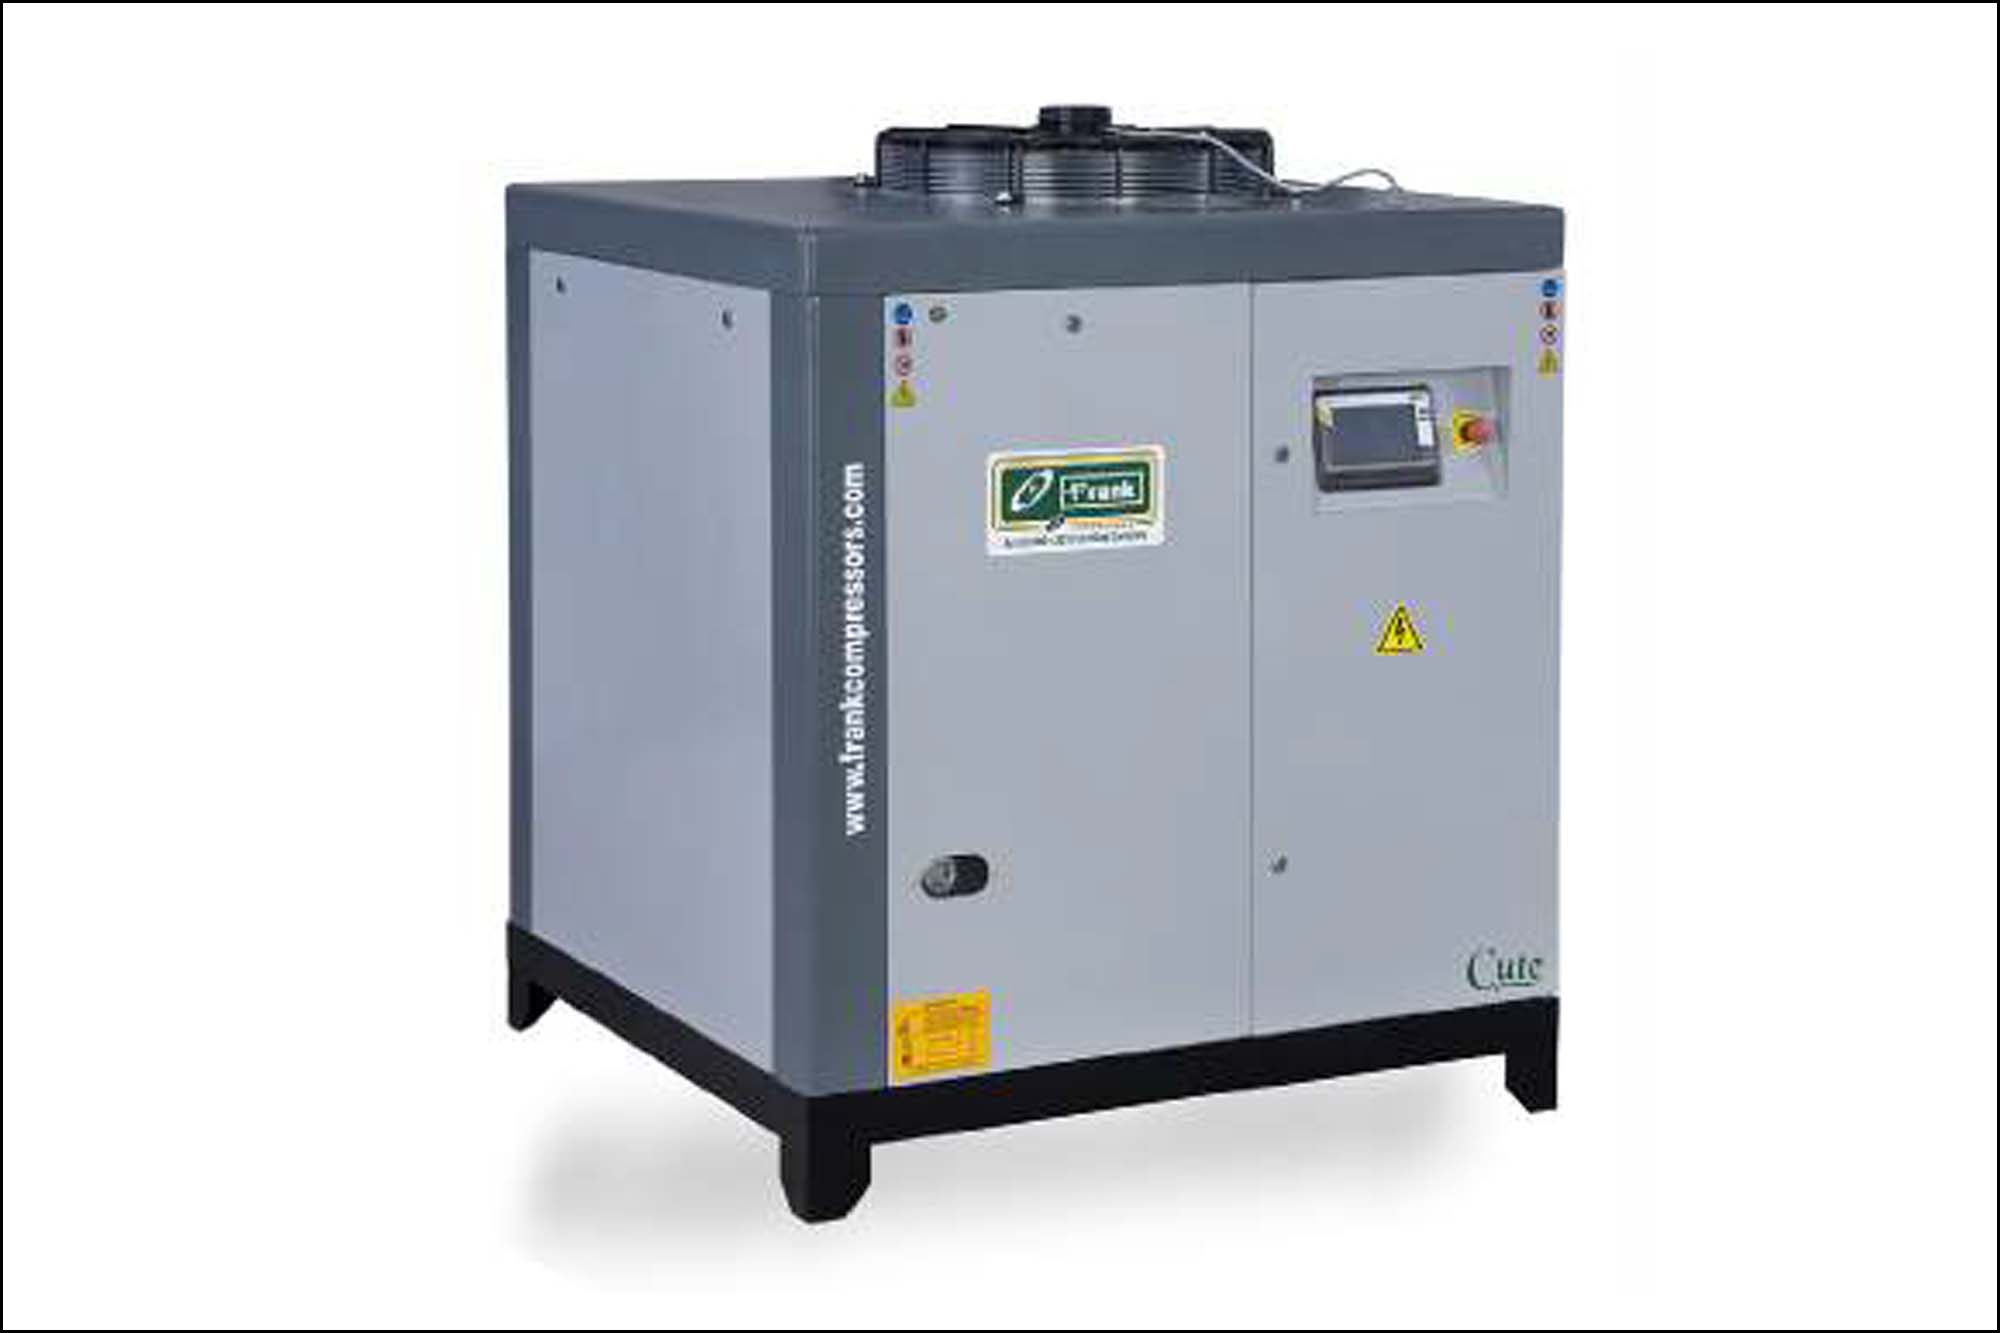 Frank Technologies’ energy-efficient air compressors redefining industrial excellence